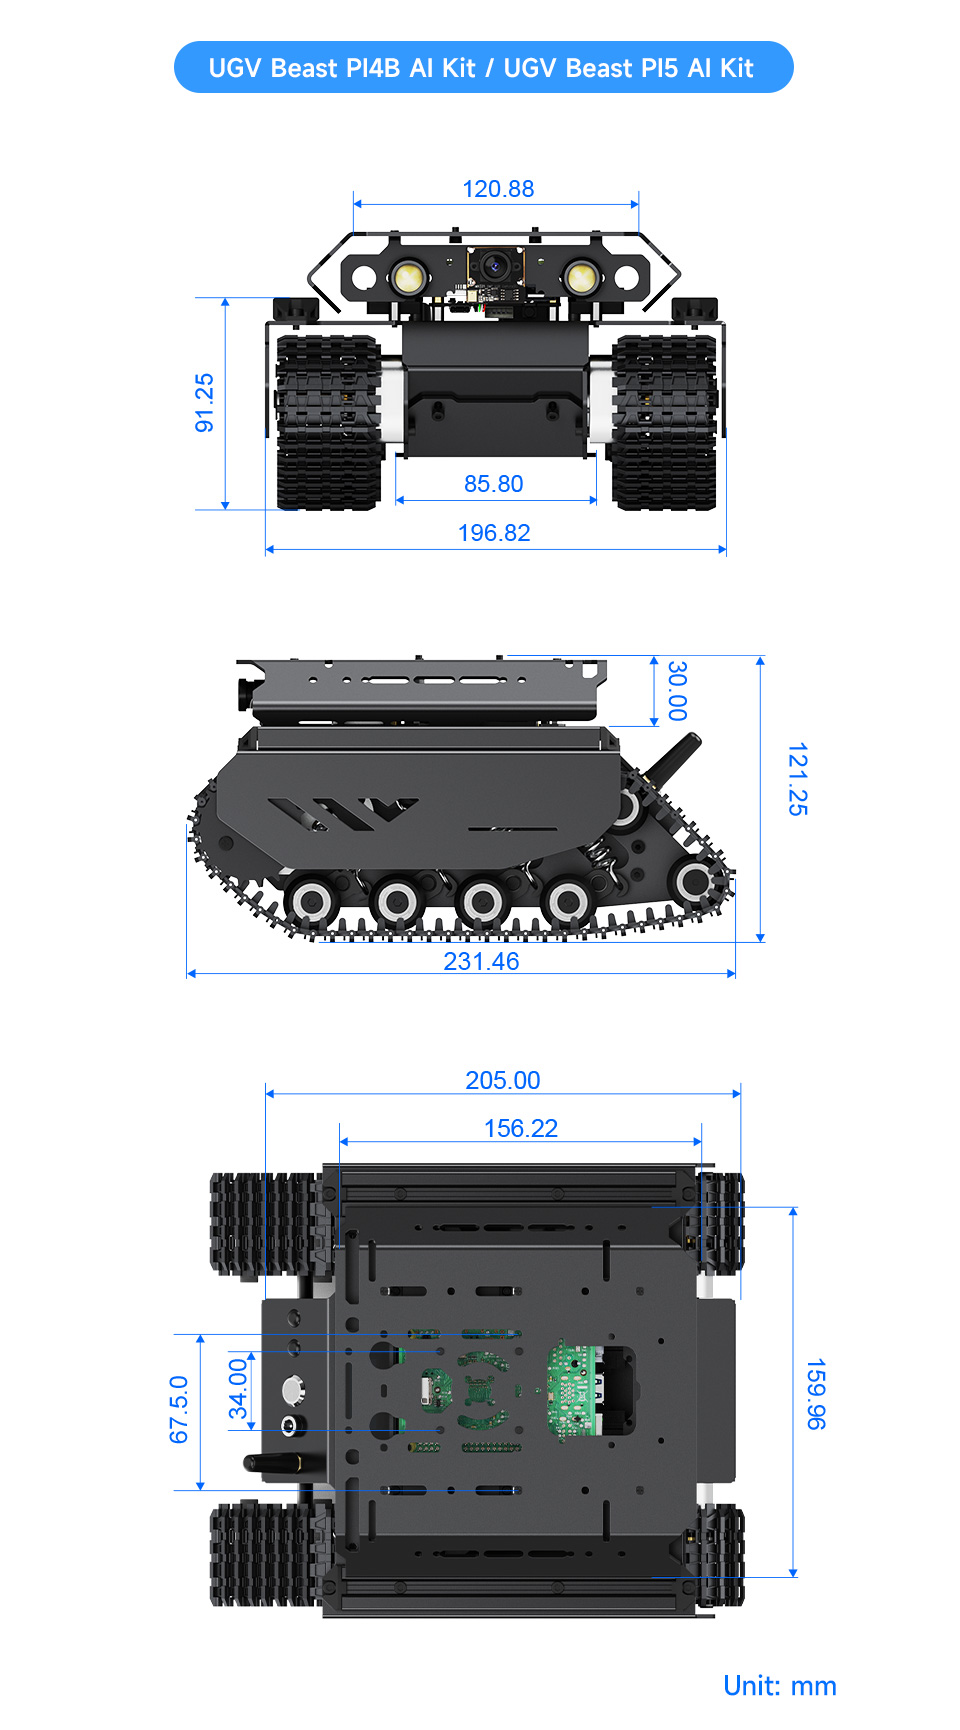 UGV Beast AI Kit without PT module, outline dimensions